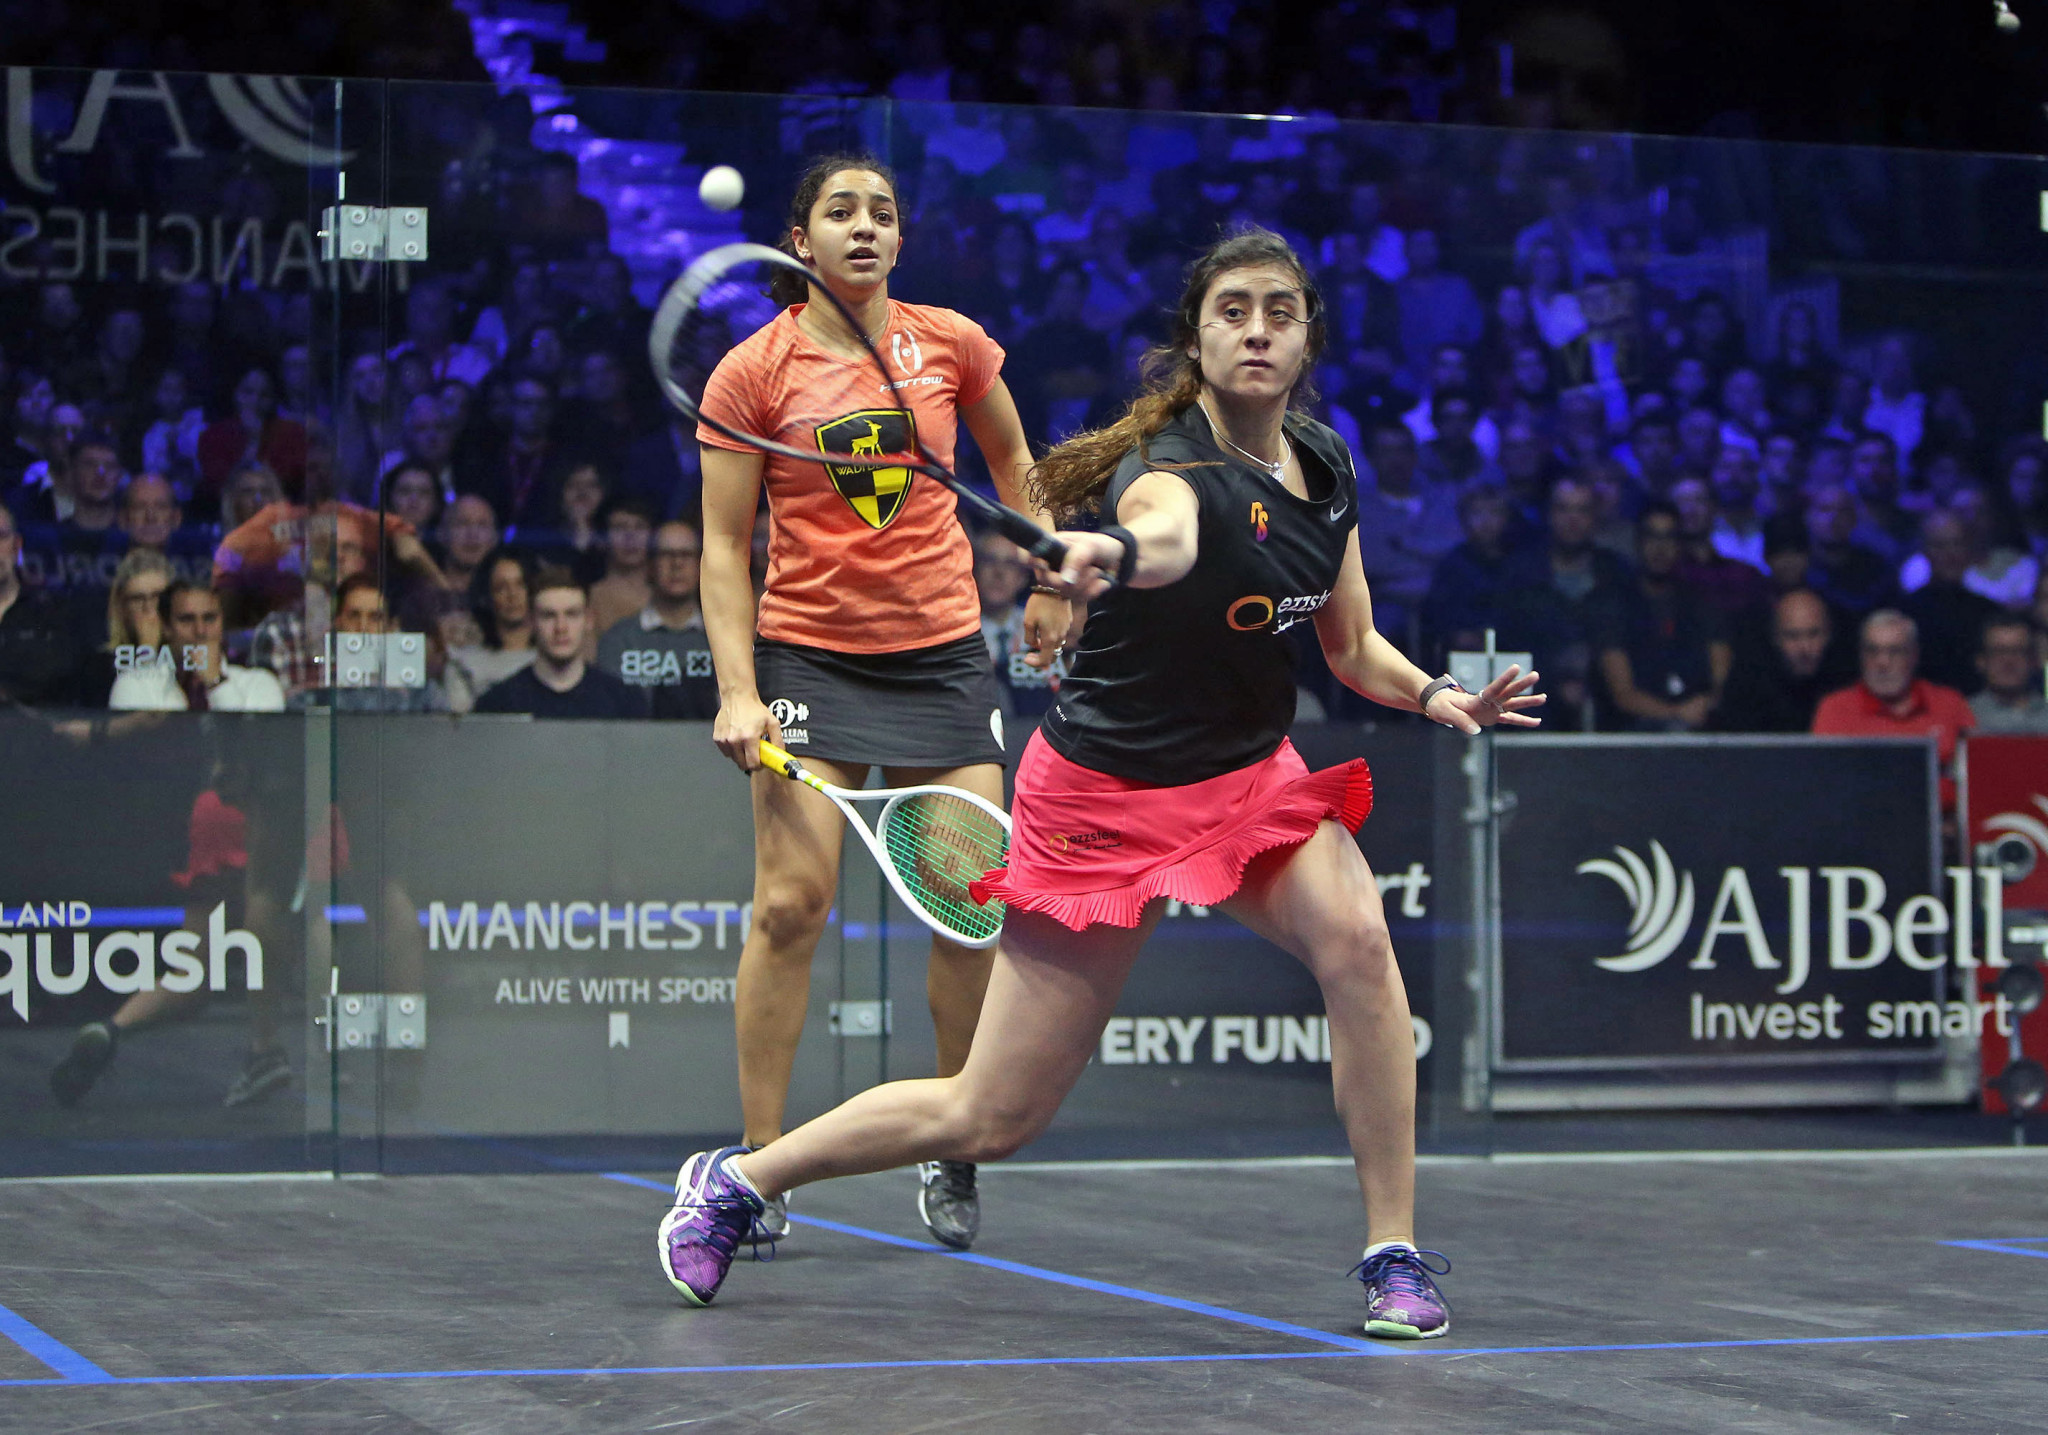 World Squash Library launches first statistics collection for major Championships